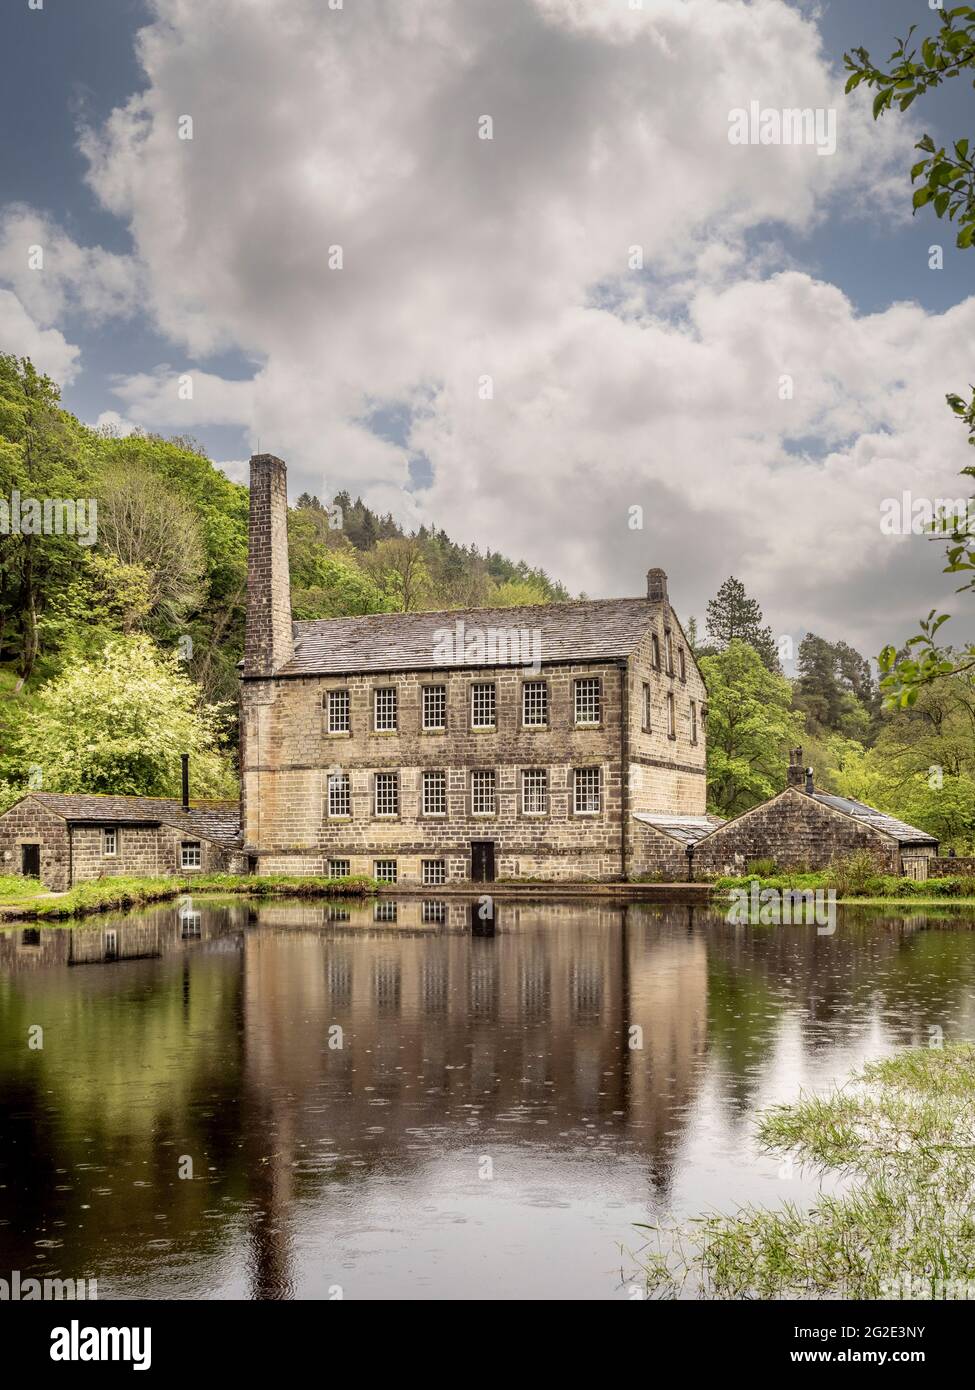 Gibson Mill, a former cotton mill in Hardcastle Crags, wooded Pennine valley in West Yorkshire, England. Now an off-grid visitor attraction. Stock Photo